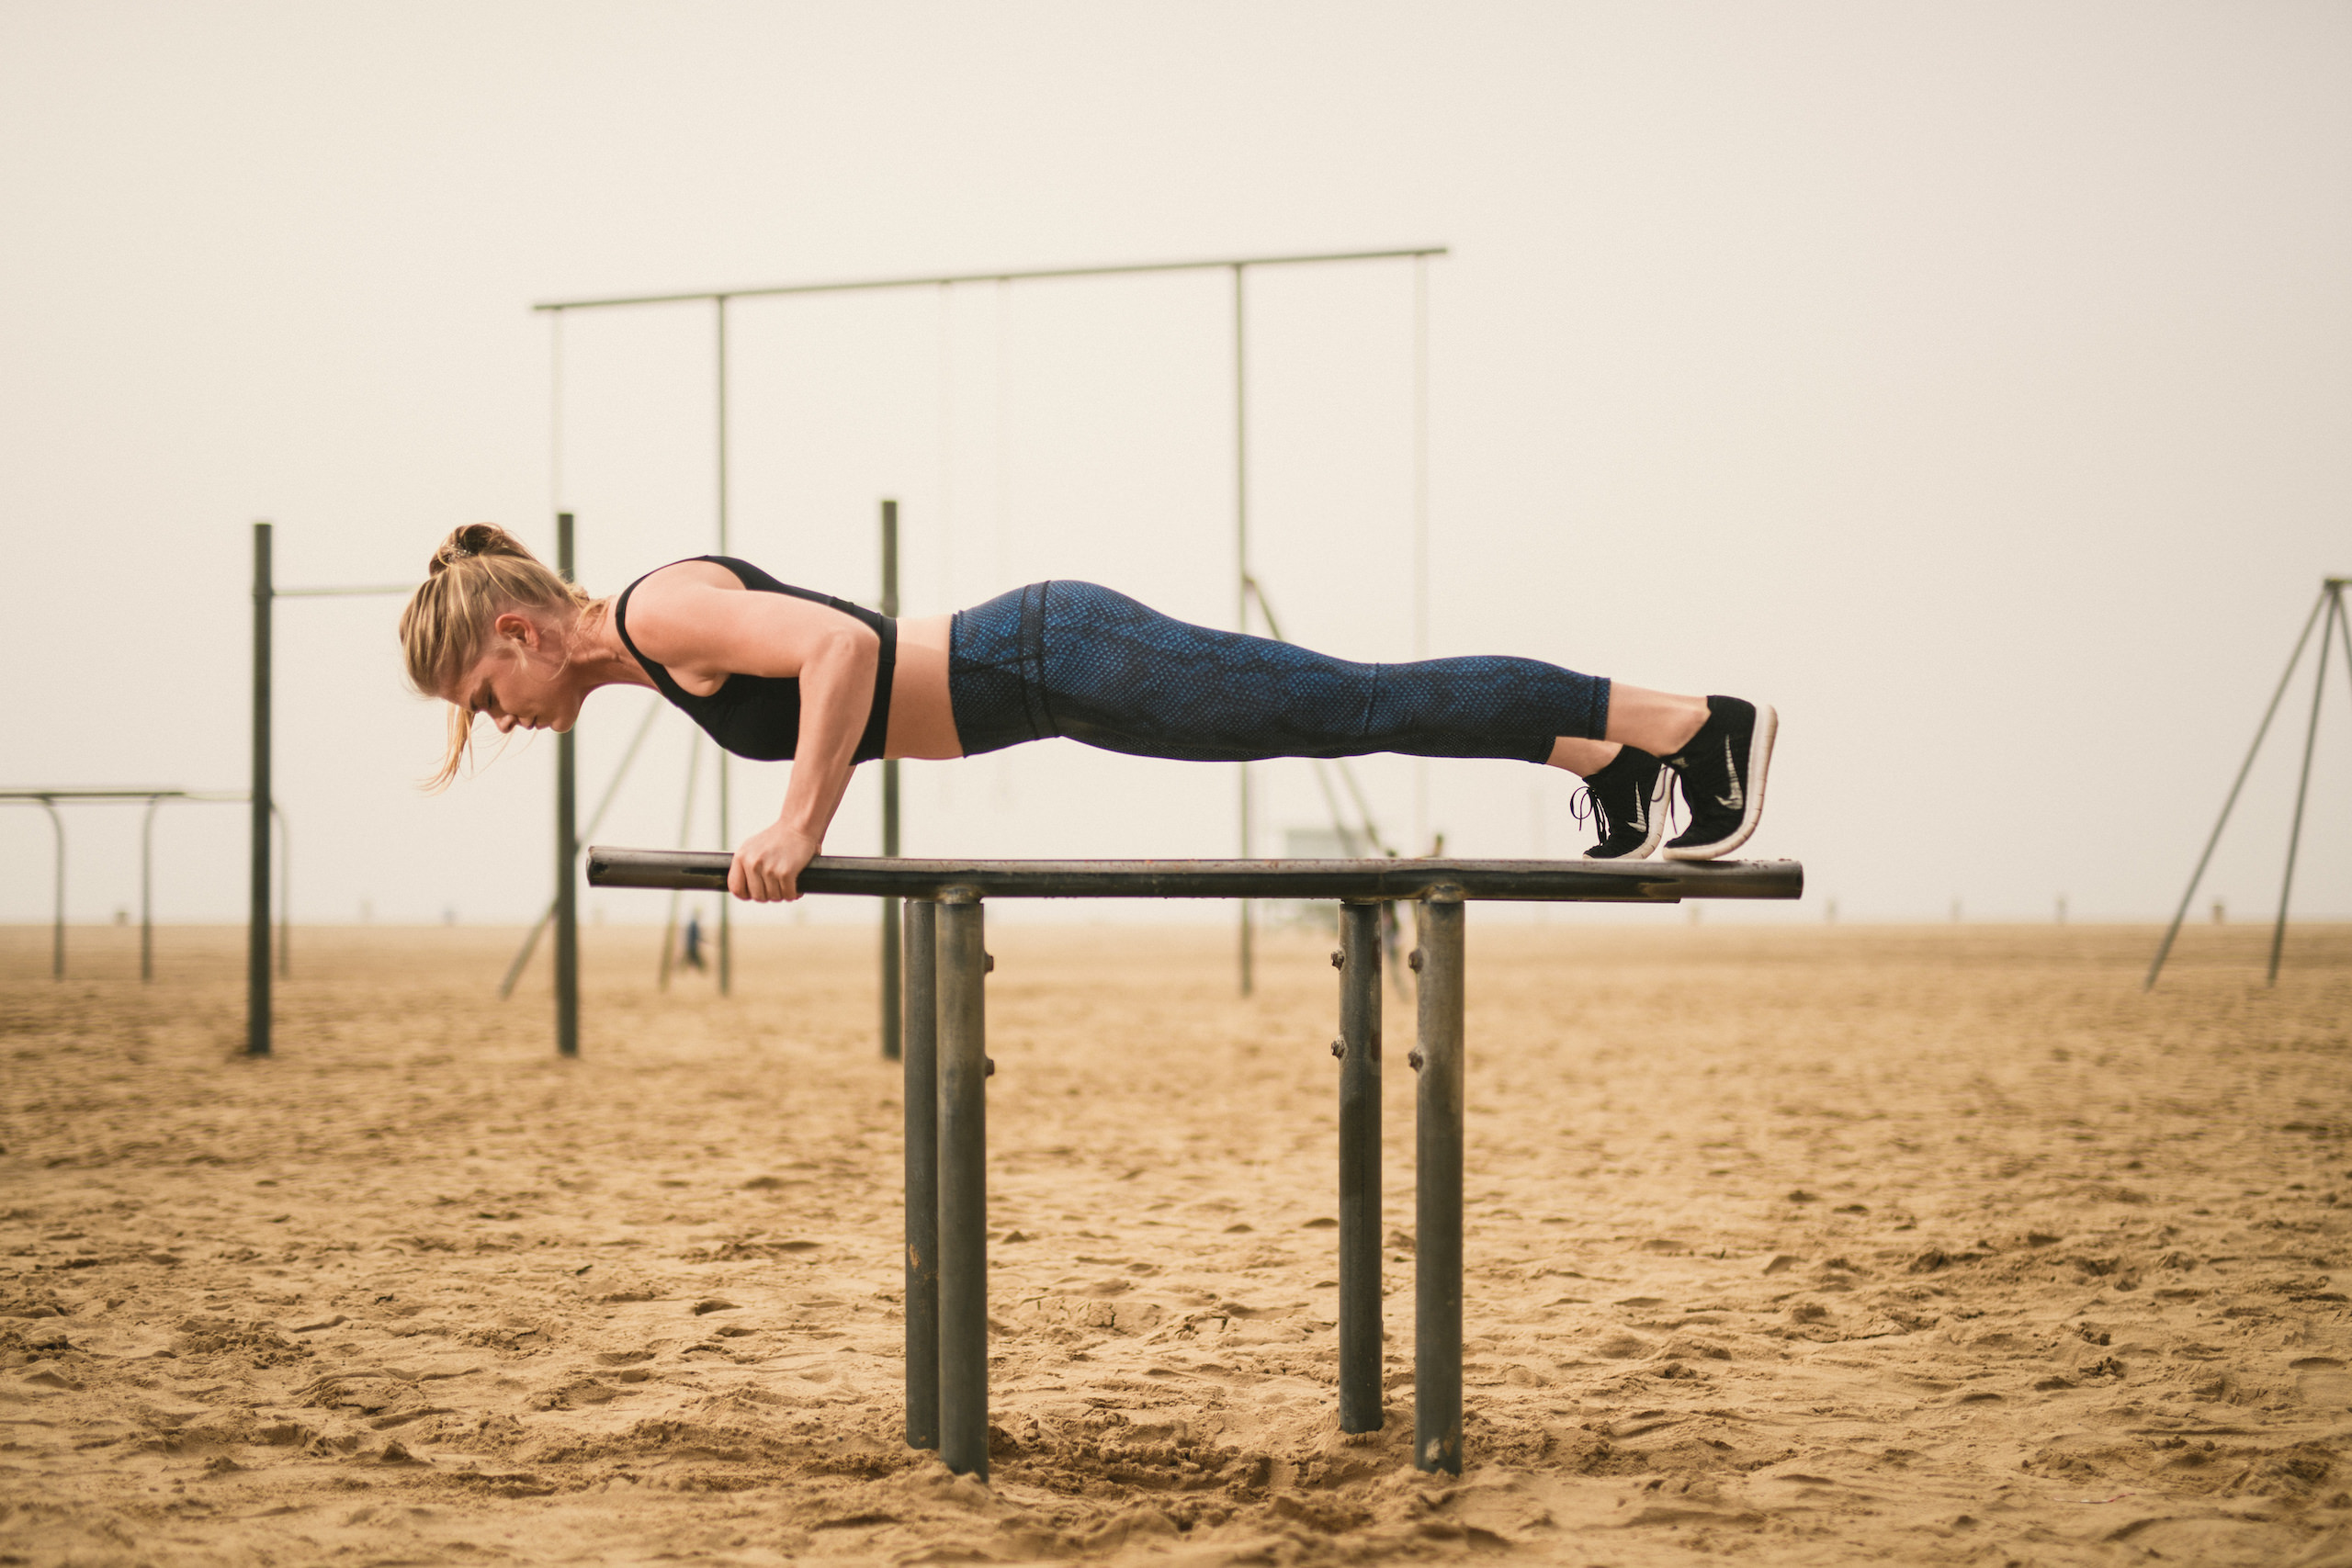 Health and Fitness Marketing JSM Side profile of woman doing a plank on metal parallel bars